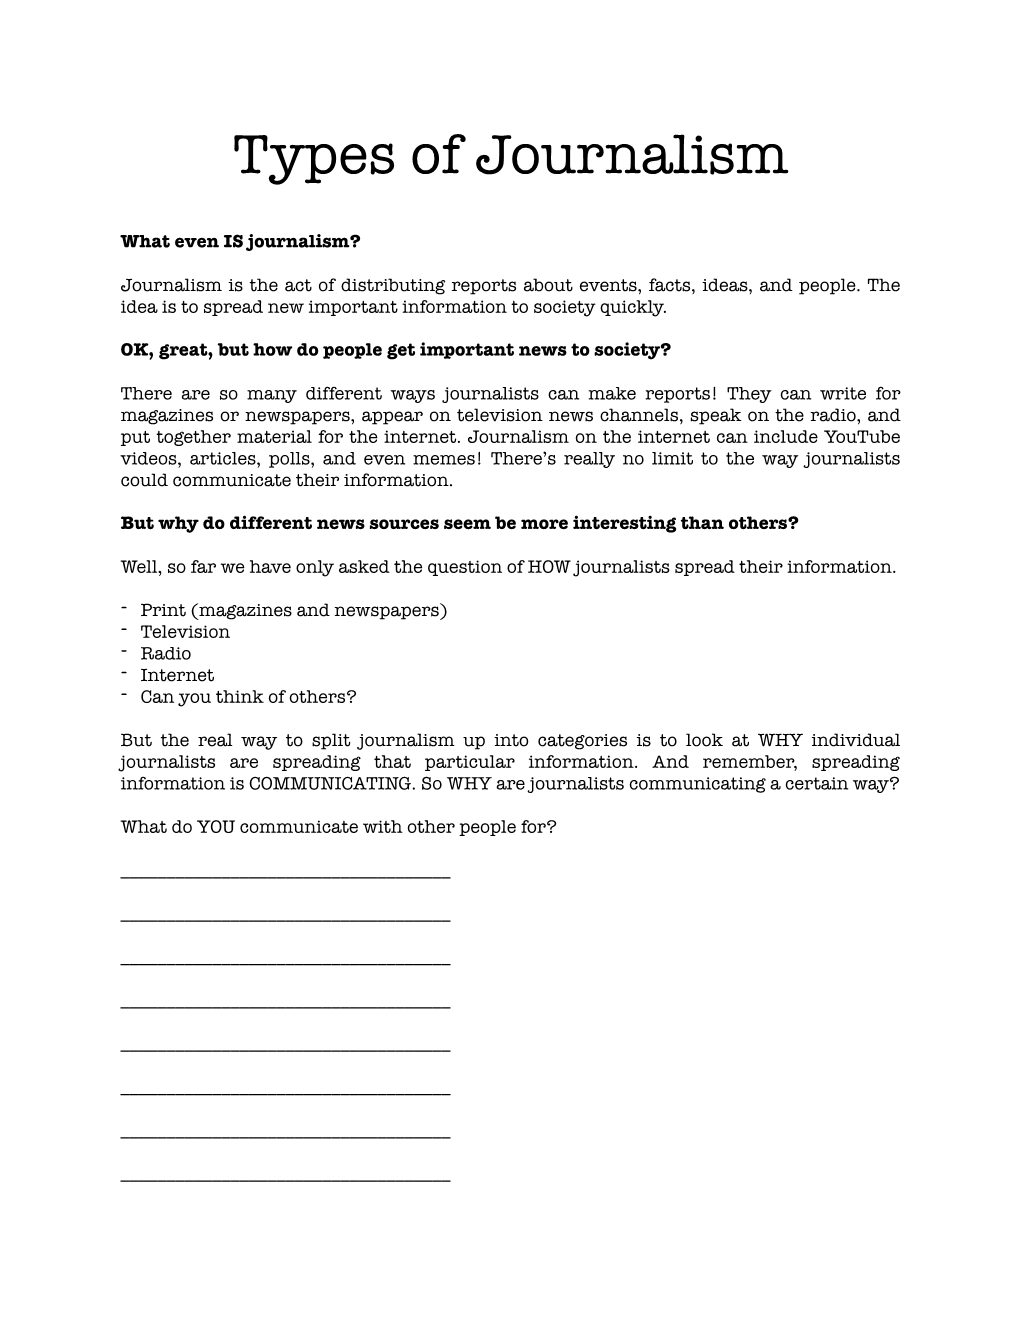 Types of Journalism Paper